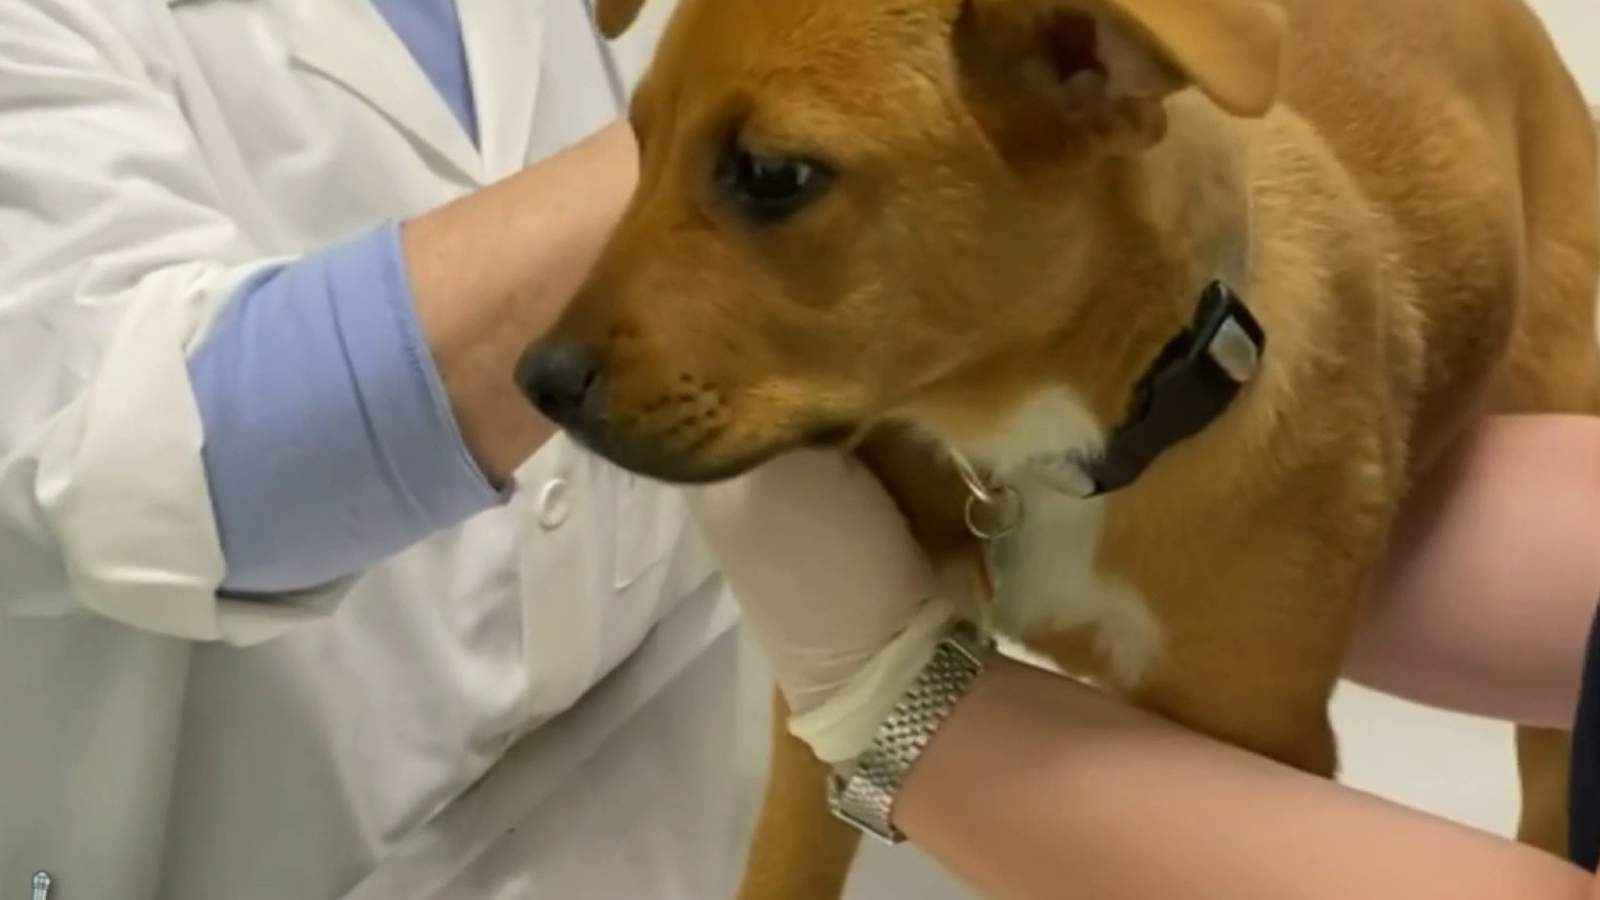 Detroit woman frustrated that Michigan veterinary clinics still won’t let pet owners inside